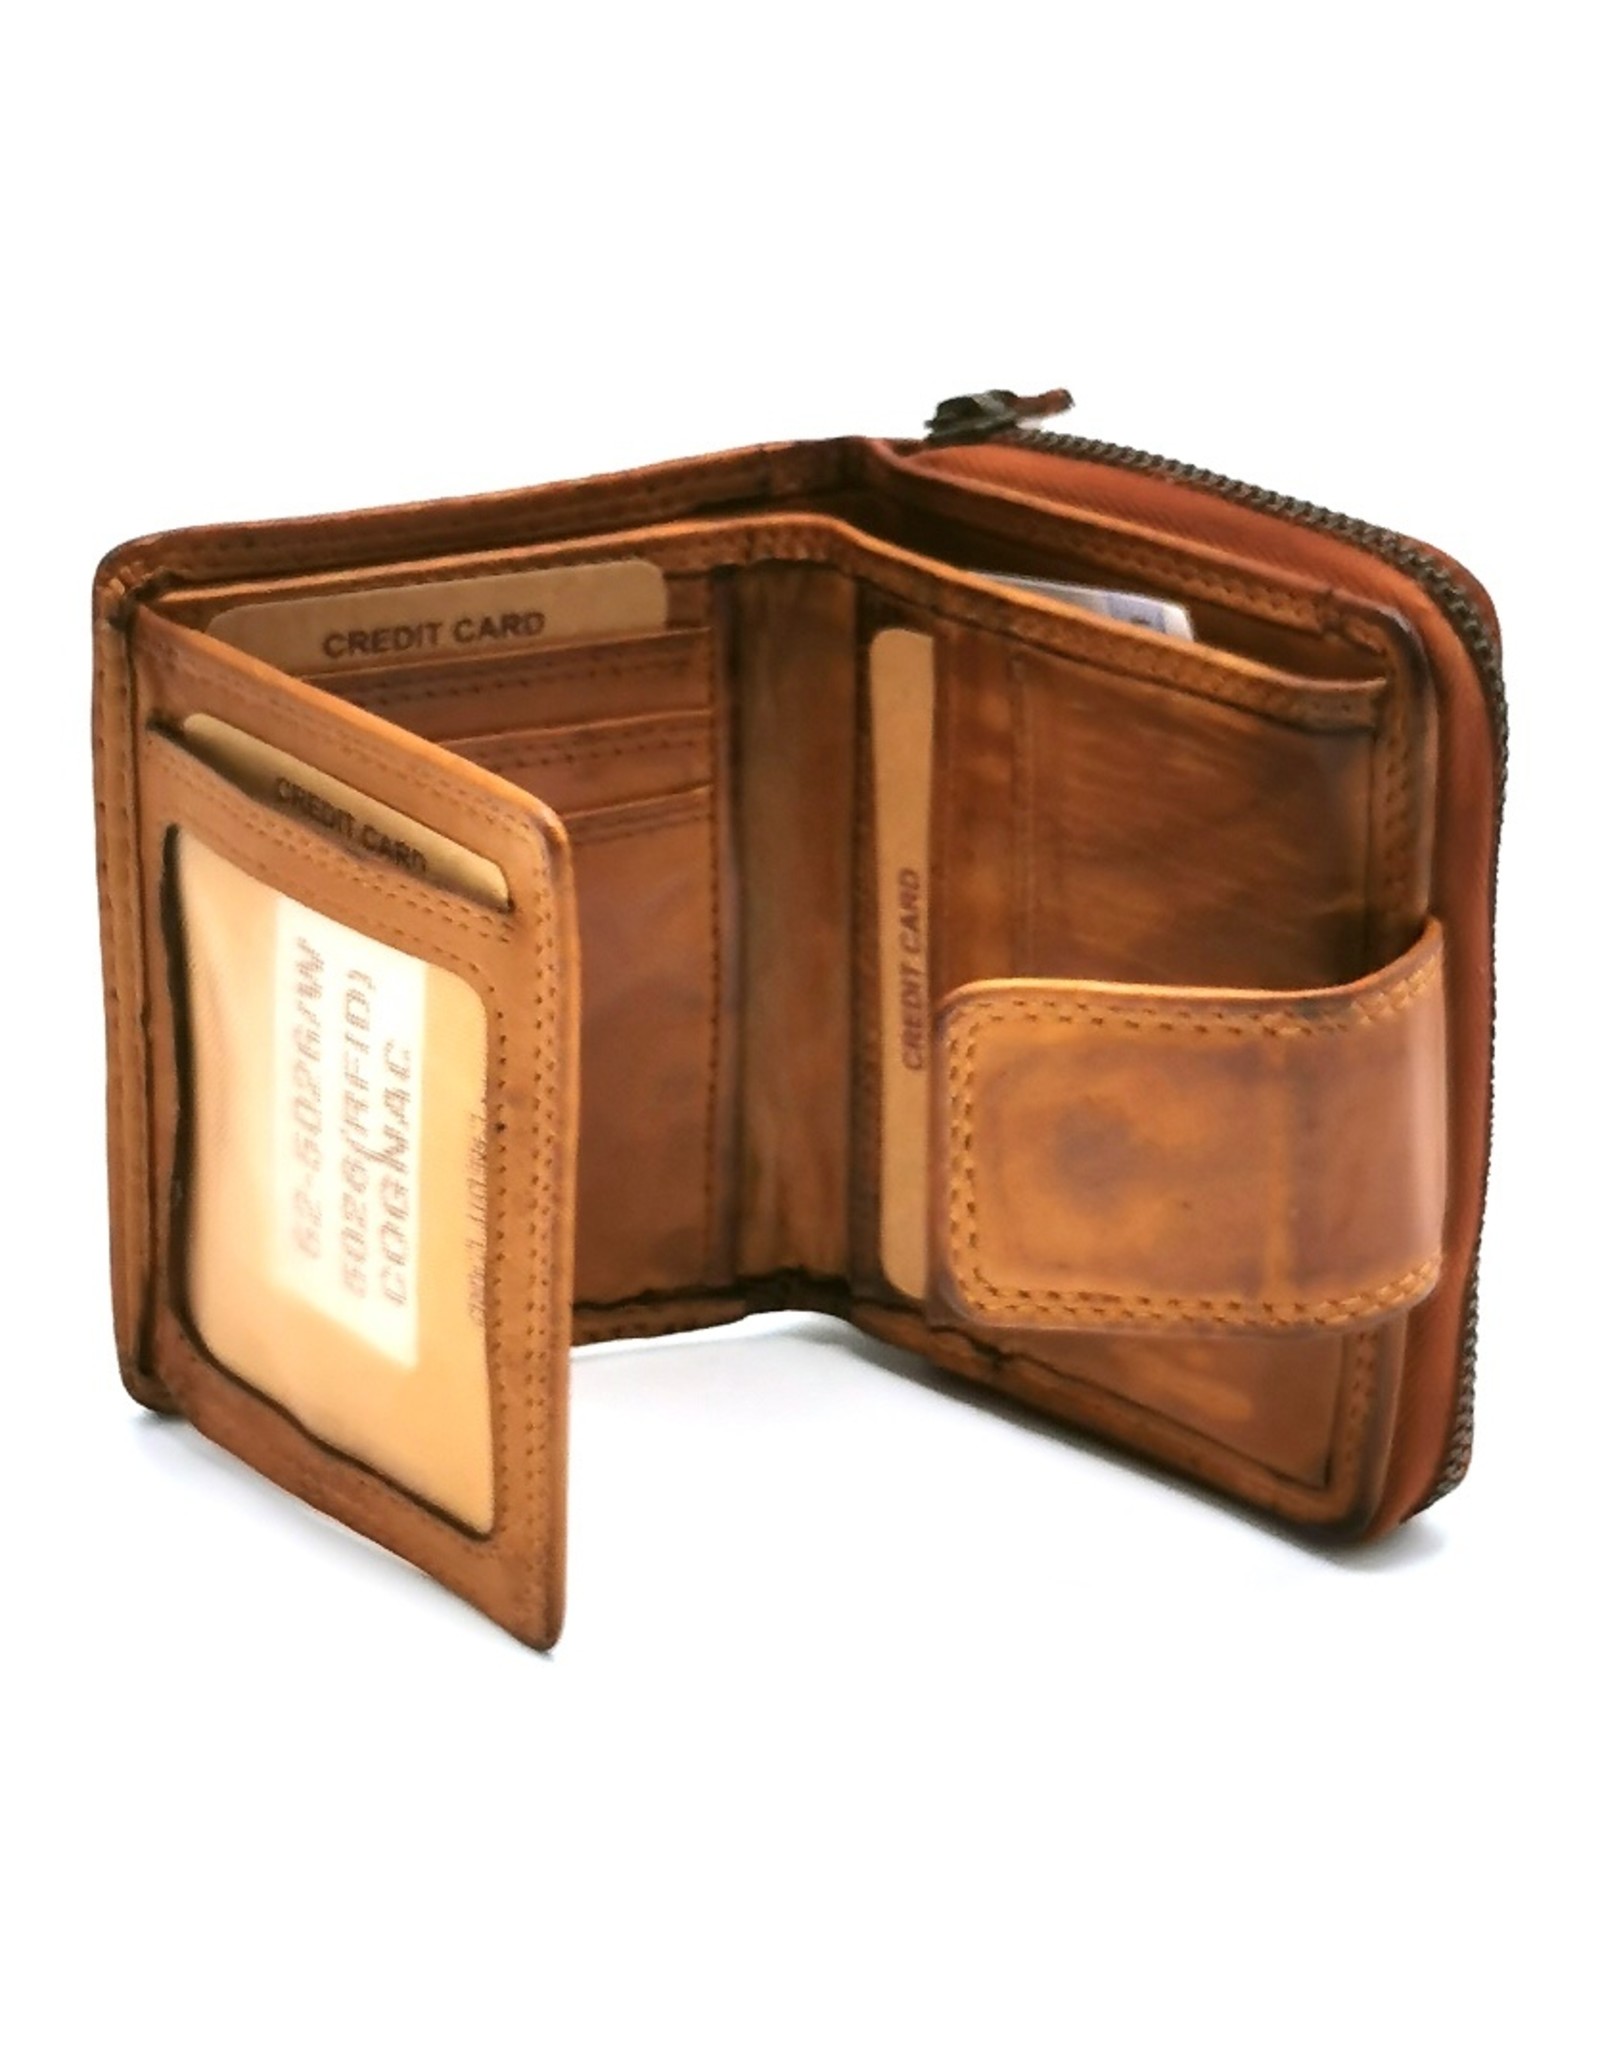 HillBurry Leather Wallets - HillBurry Wallet Washed Leather Cognac